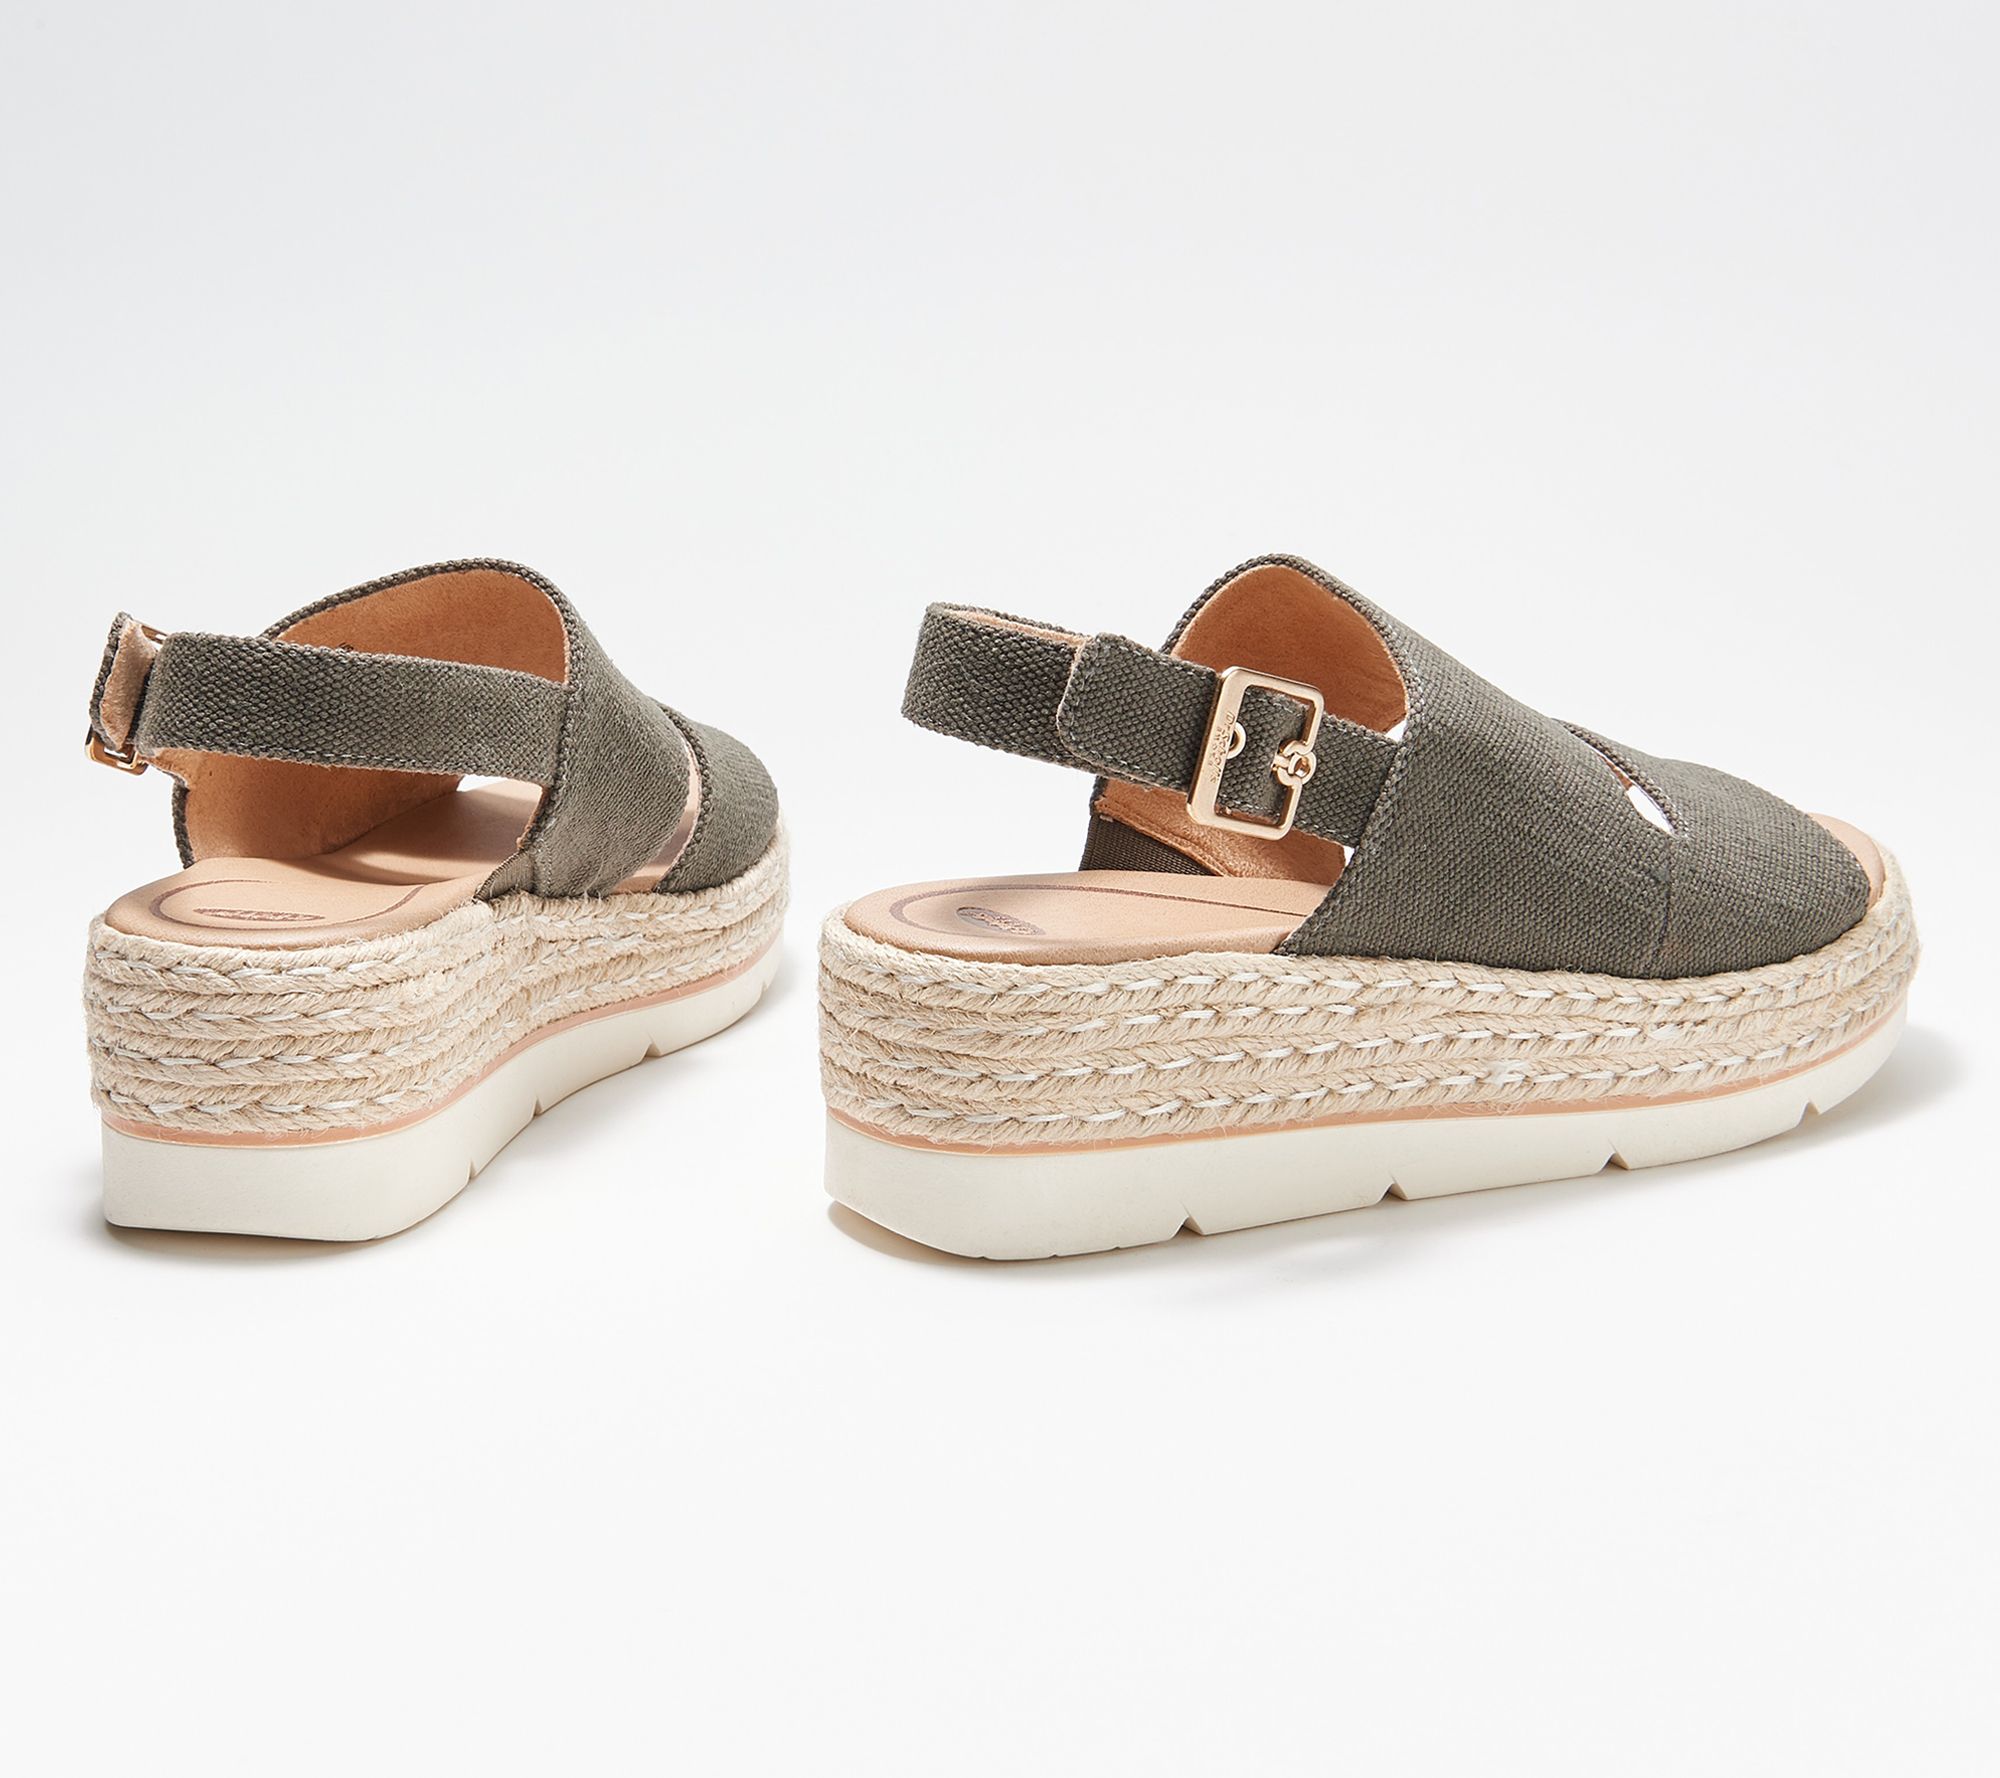 Dr. Scholl's Espadrille Wedges - Oh Hey - QVC.com